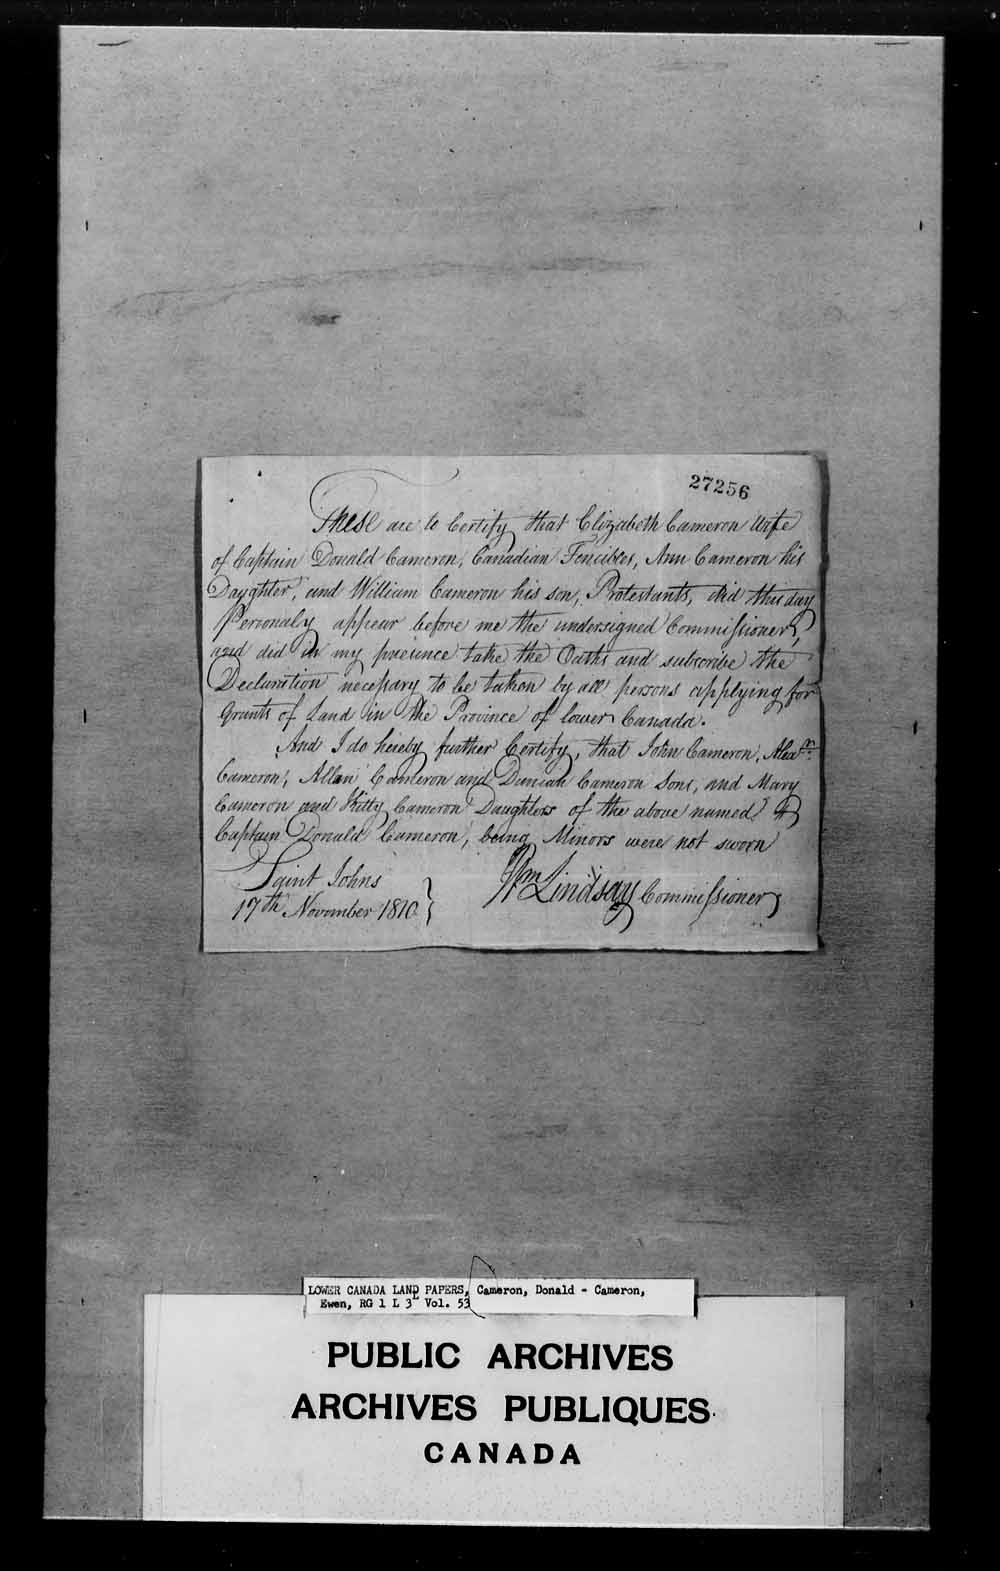 Digitized page of  for Image No.: e006611636